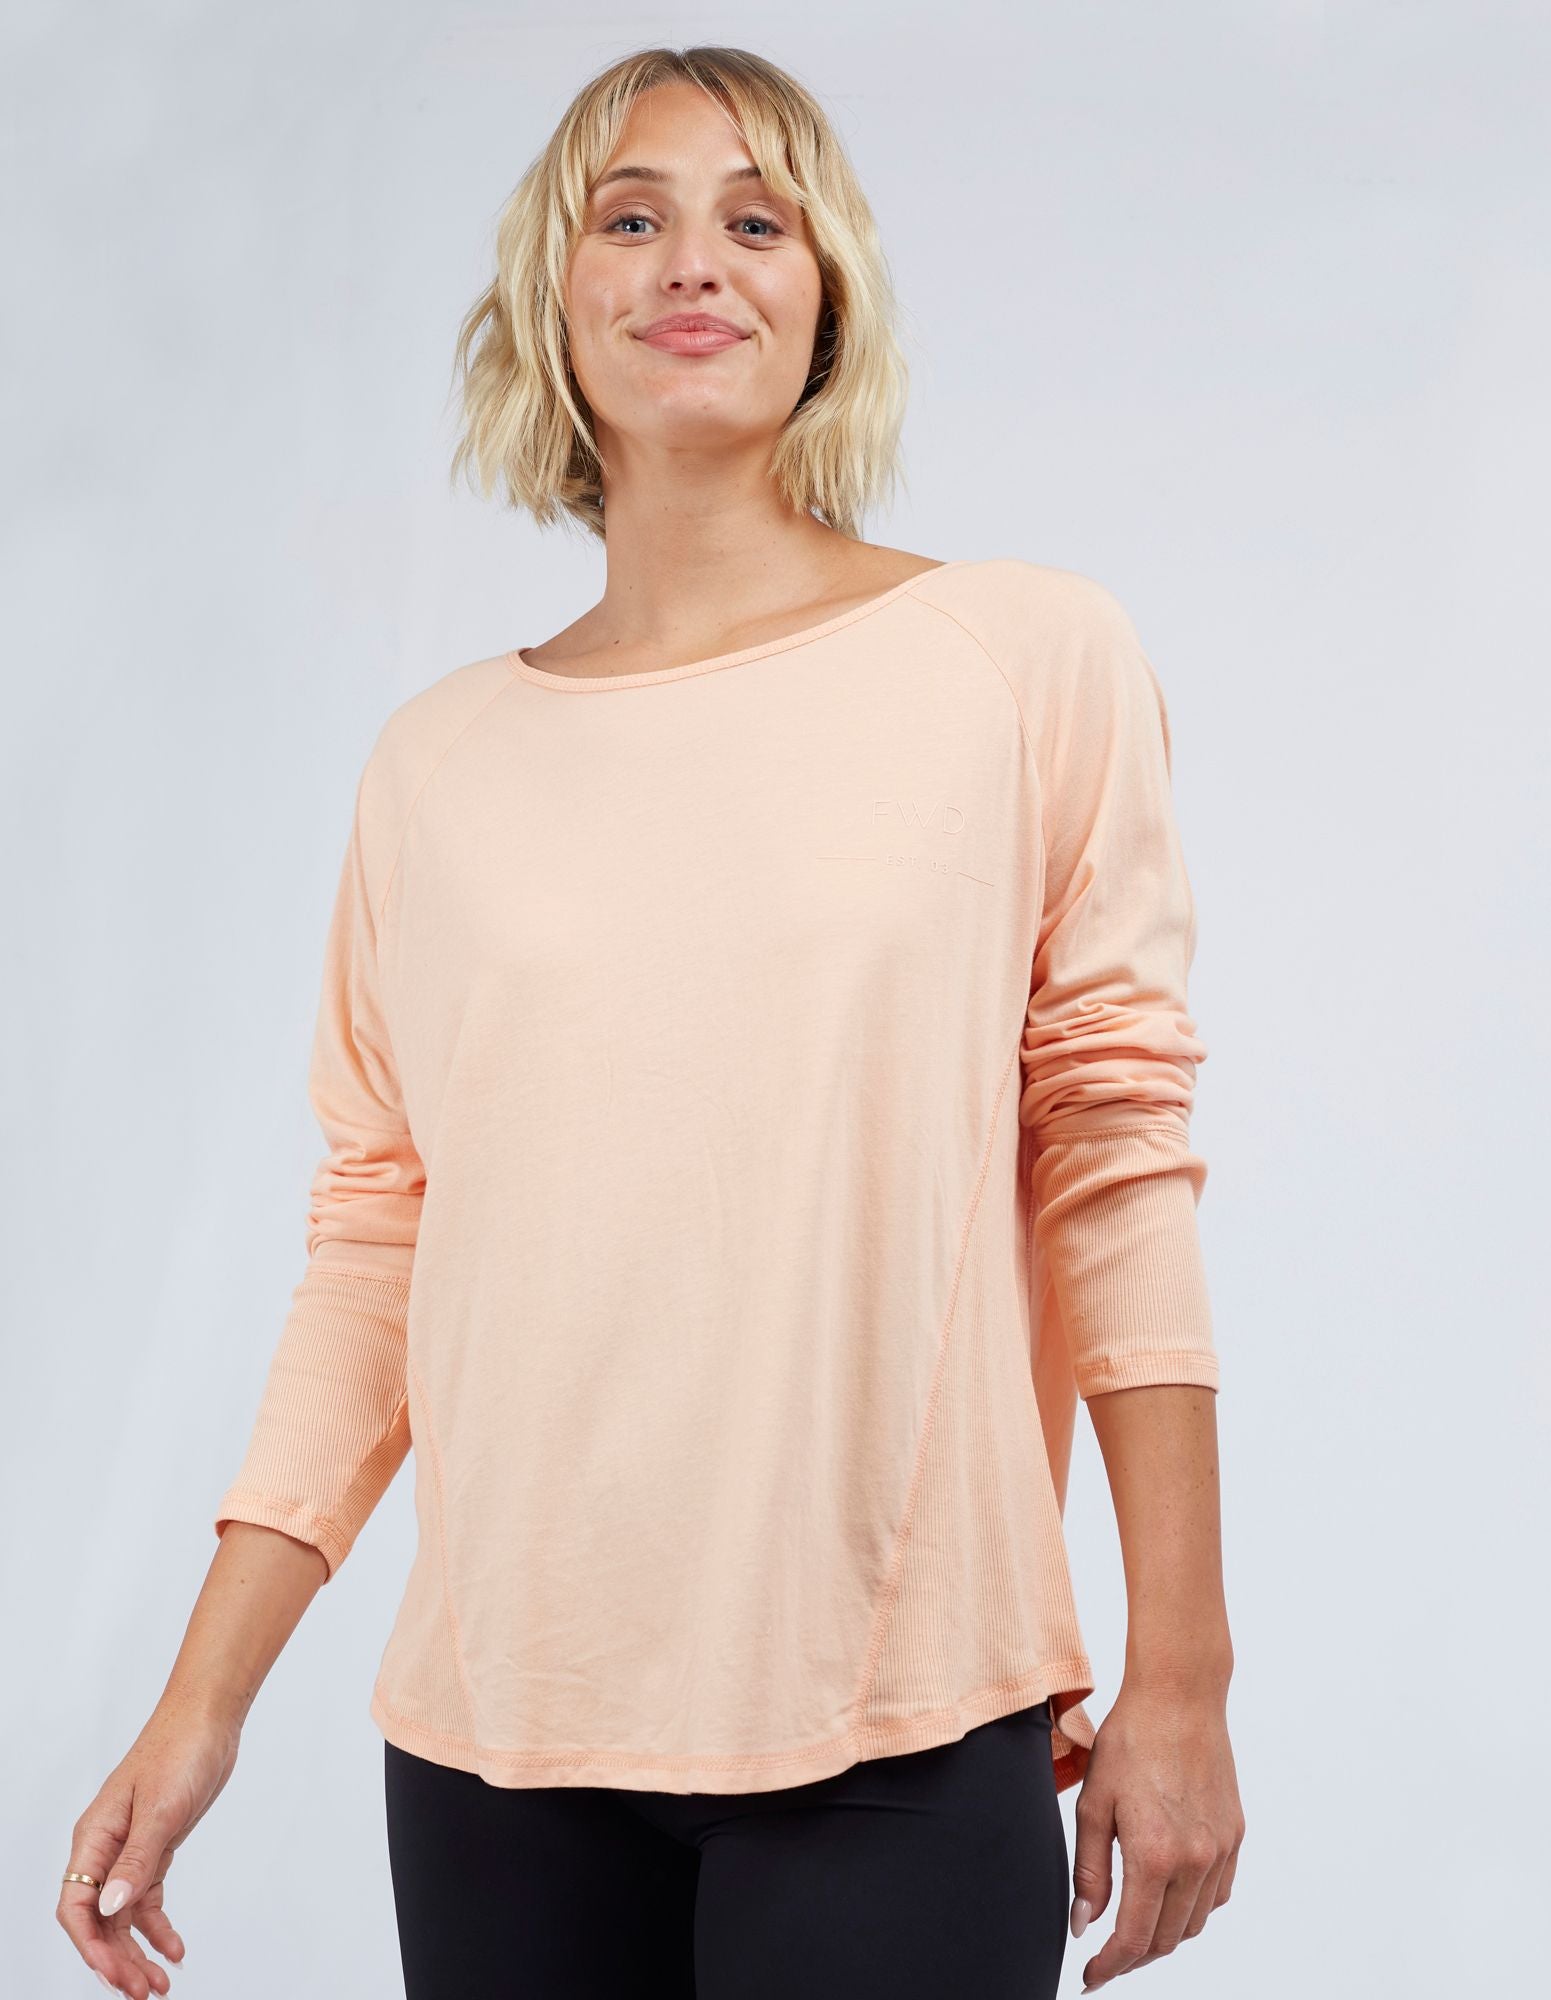 Extend L/S Tee - Melon - Foxwood - FUDGE Gifts Home Lifestyle